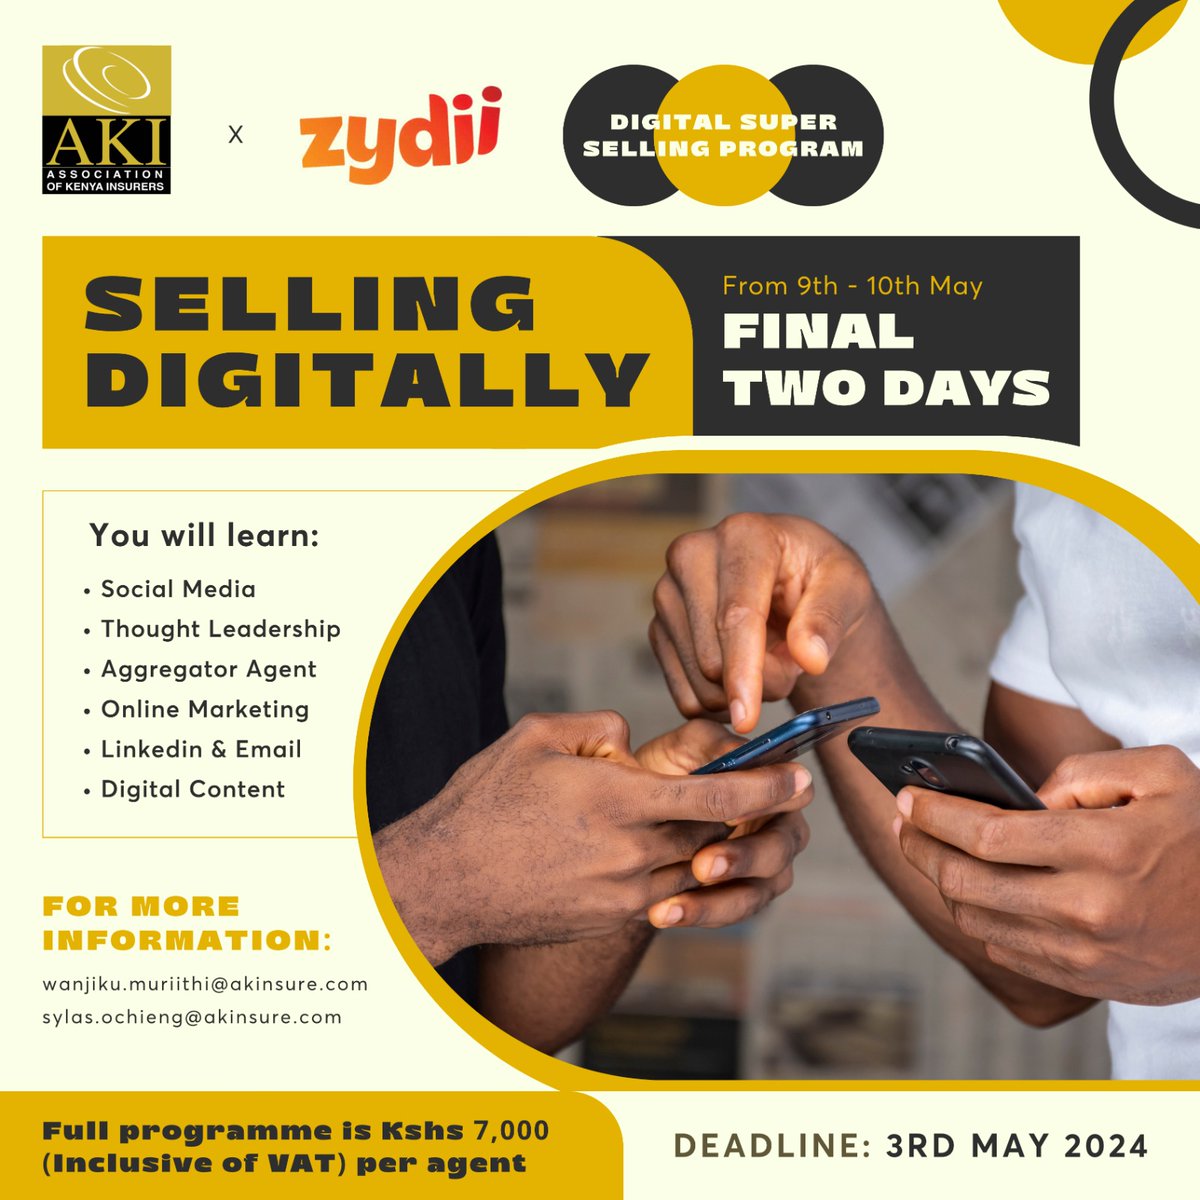 Soko imechange. Are you ready to sell and excel in today's digital space? Join in the Digital Super Selling Program to get up to speed.

Secure your spot by May 3rd- bit.ly/superselling20…

#InsuranceCareers #DigitalLearning #AKI